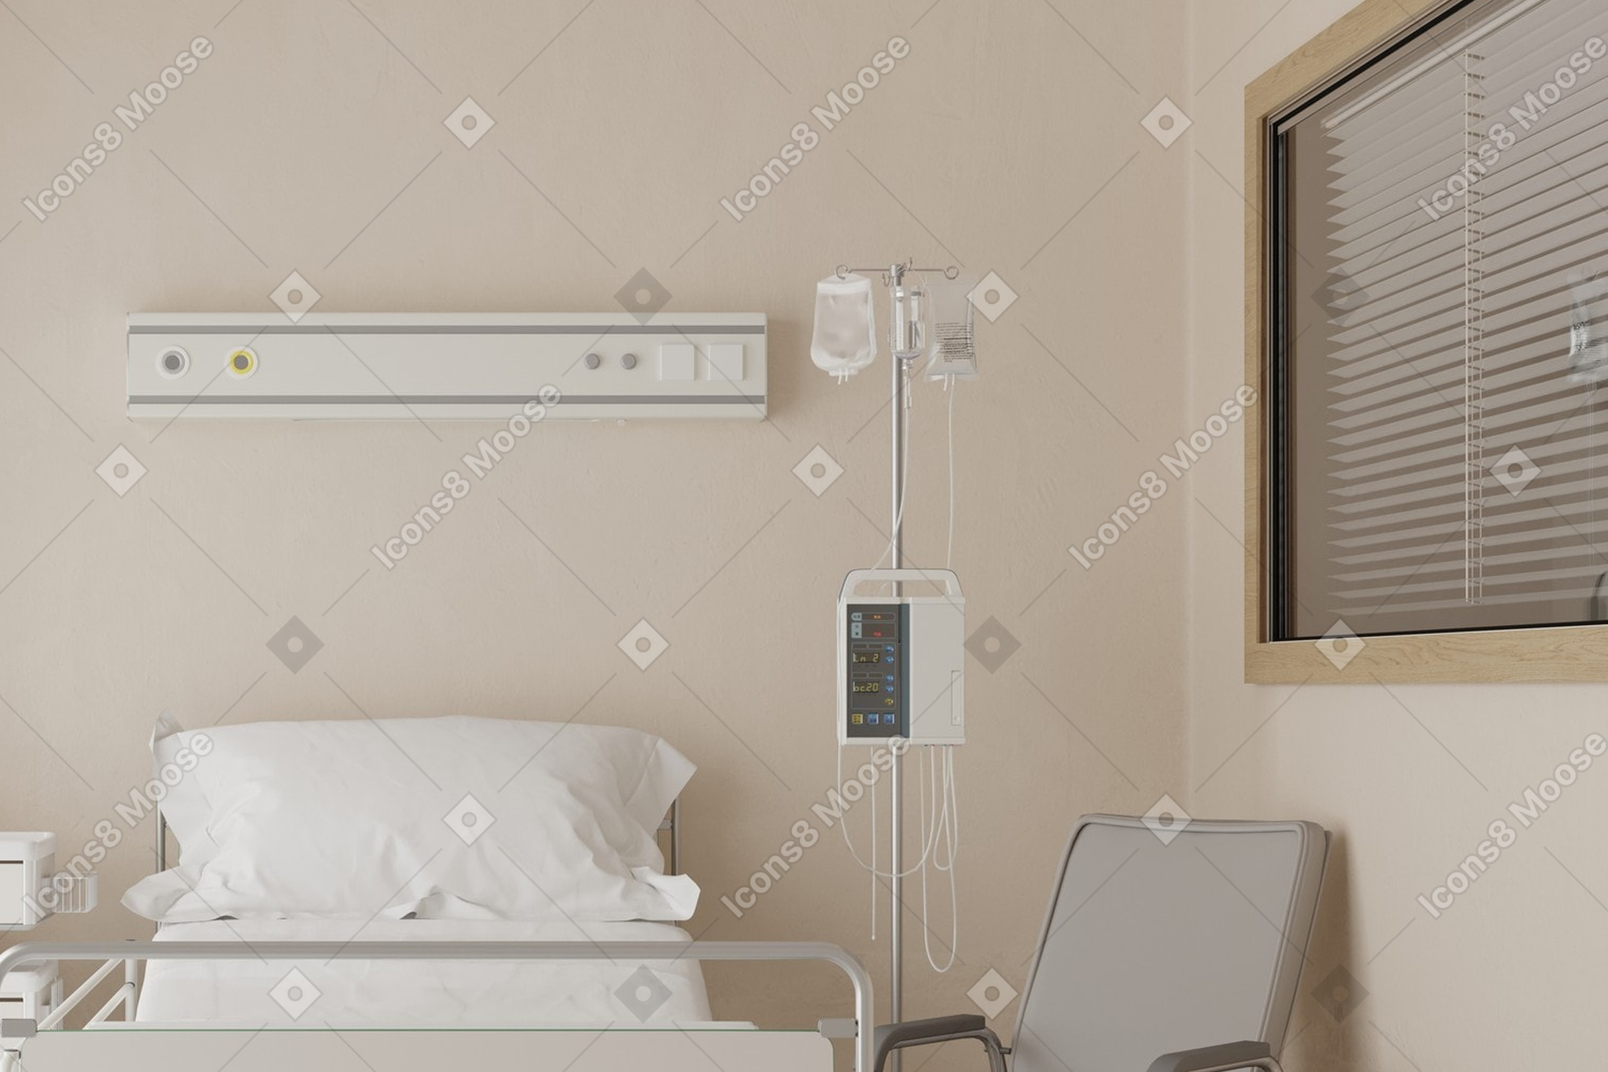 A hospital room with a bed, chair, and air conditioner